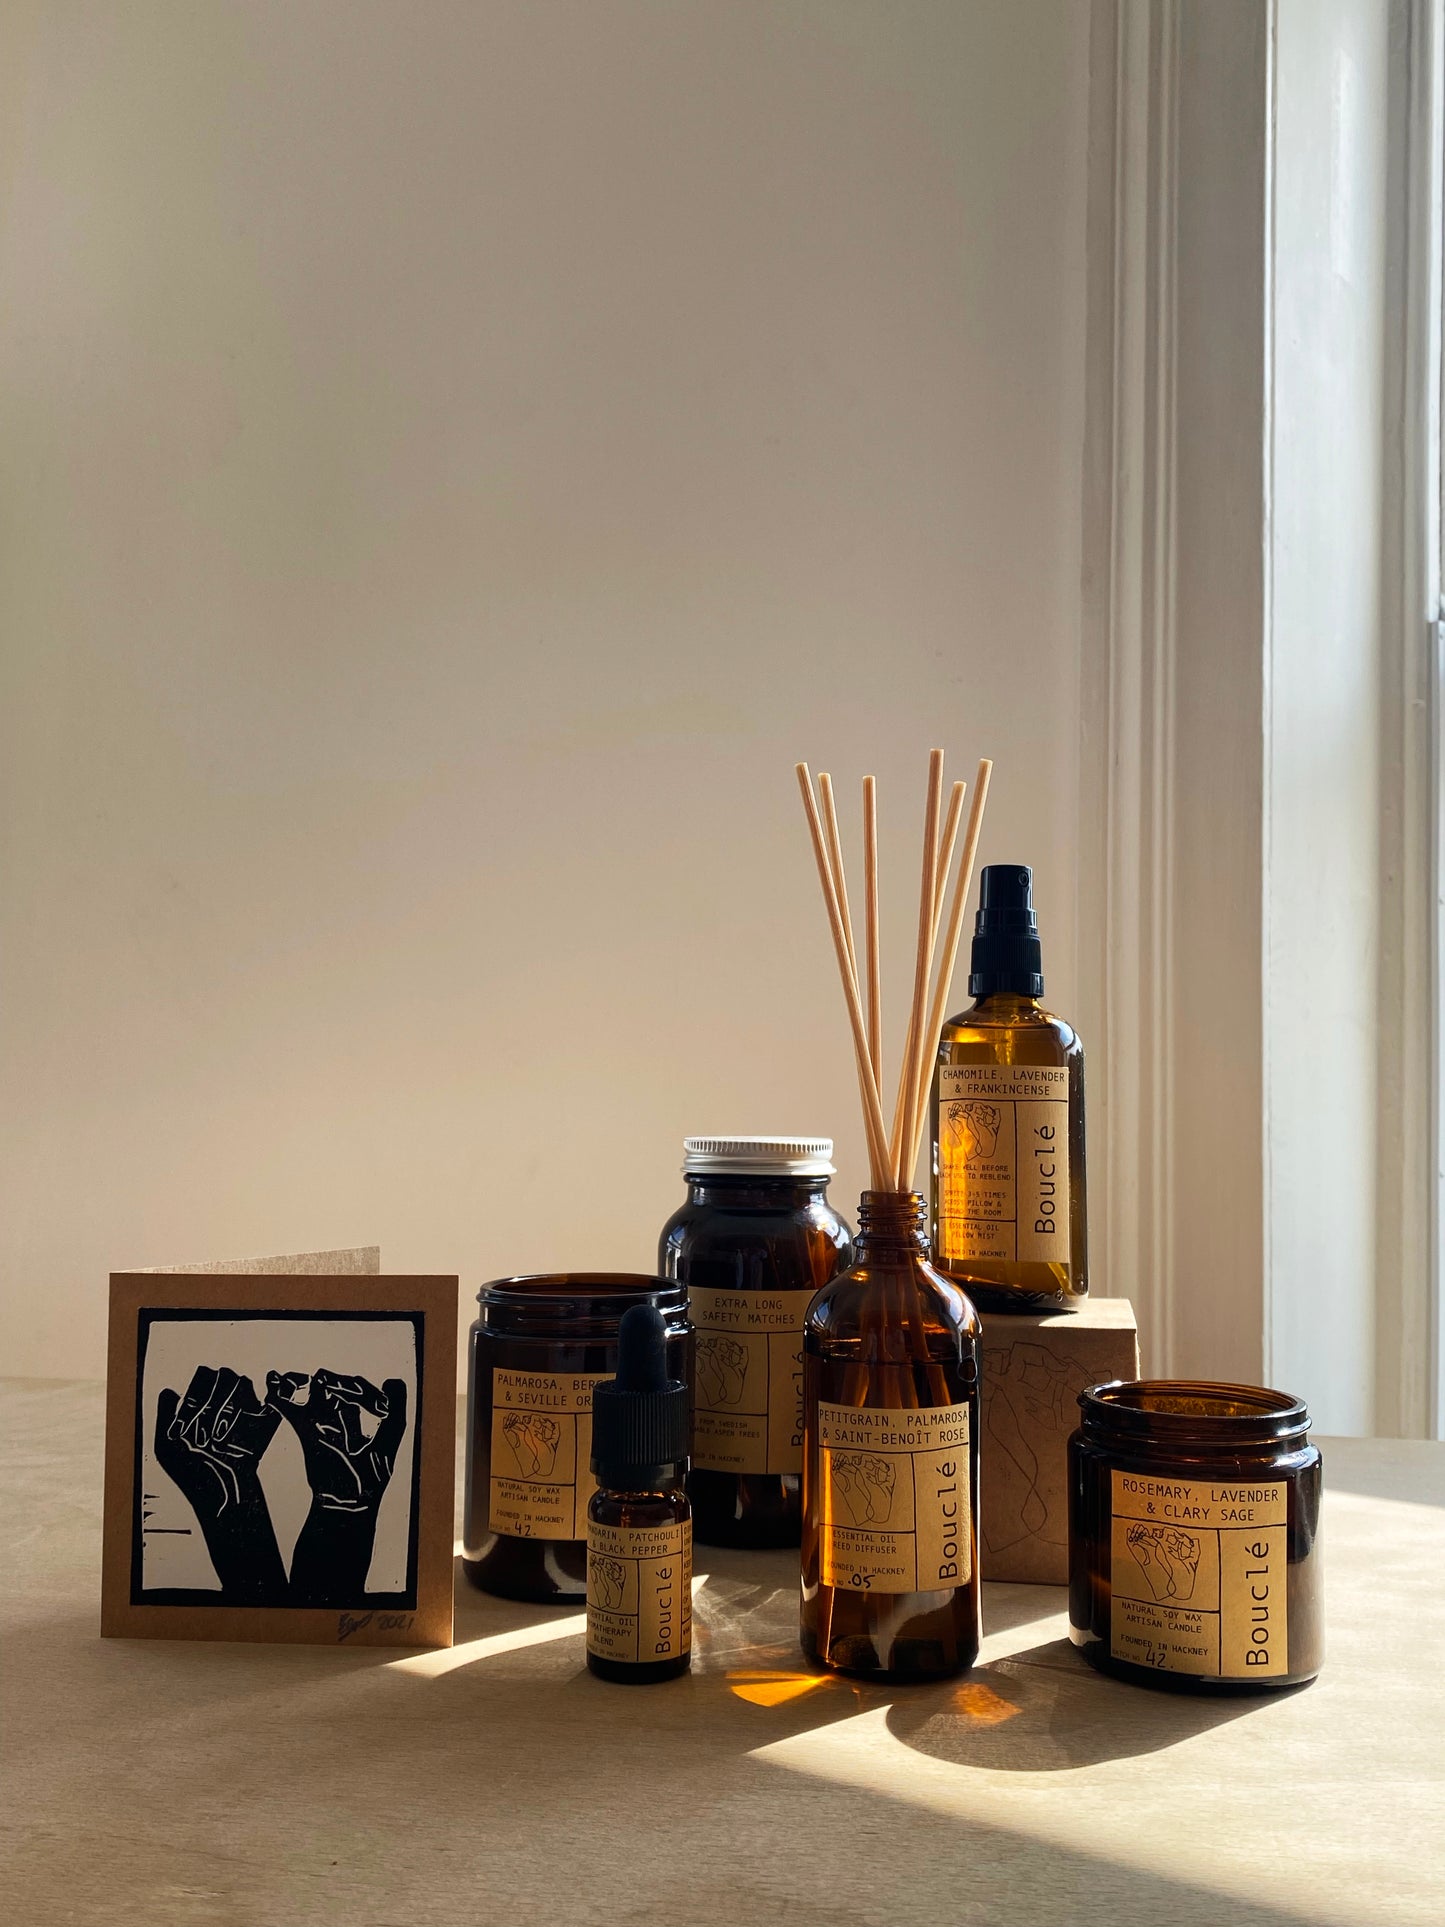 Bouclé all natural products for essential oil aroma in the home. There are two candles, a rattan reed diffuser, room spray, essentia oil blend and safety extra long matches in an amber glass jar gift.